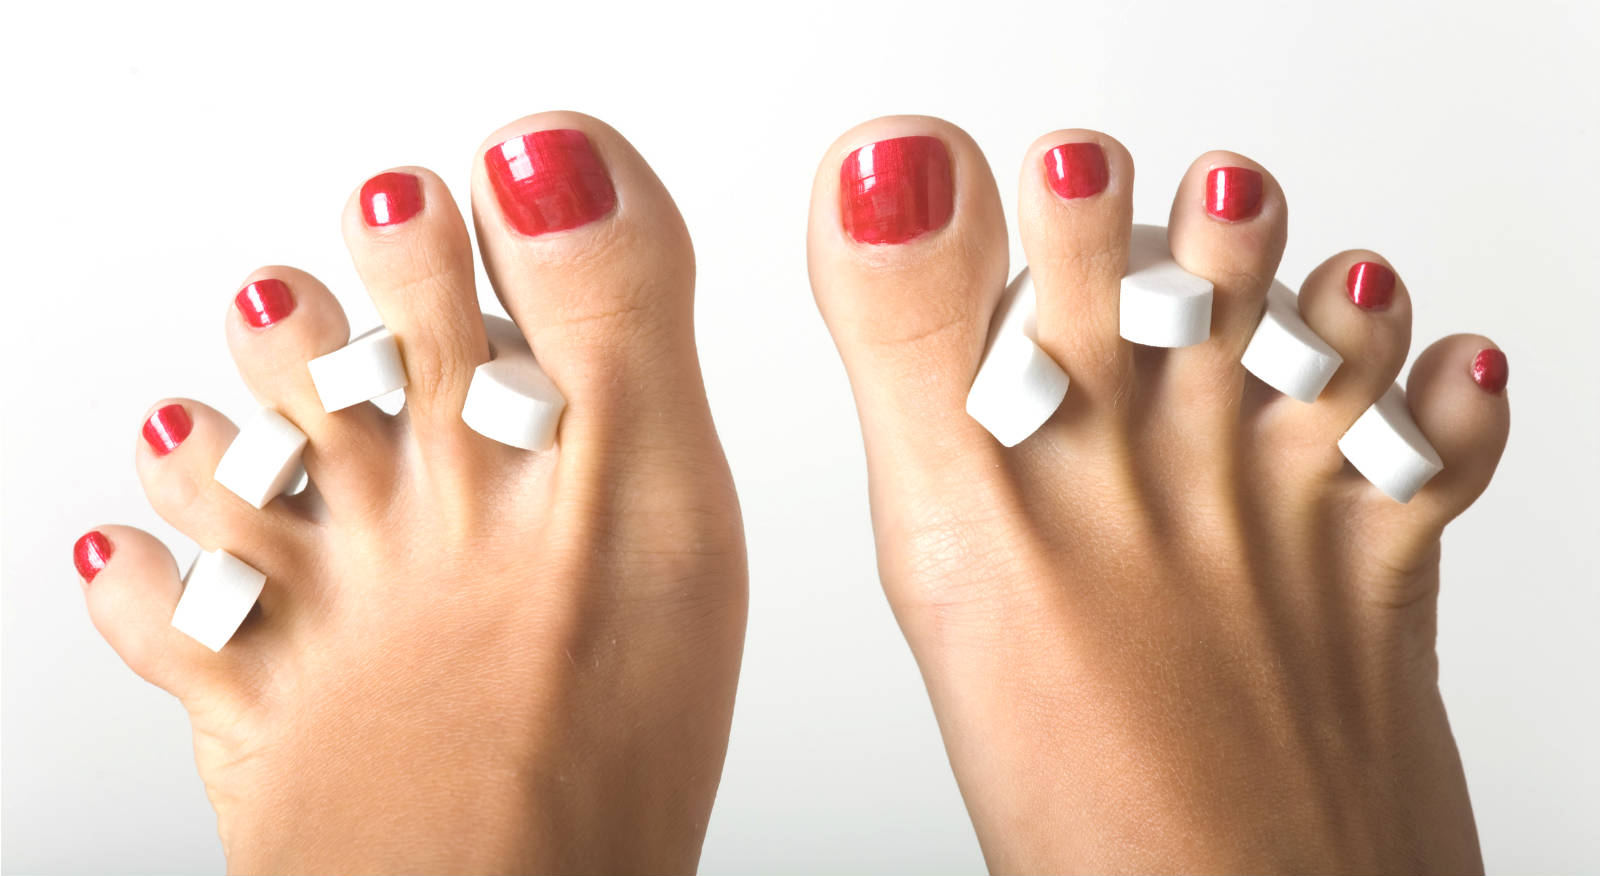 7 Tips You Should Follow For That Perfect Pedicure